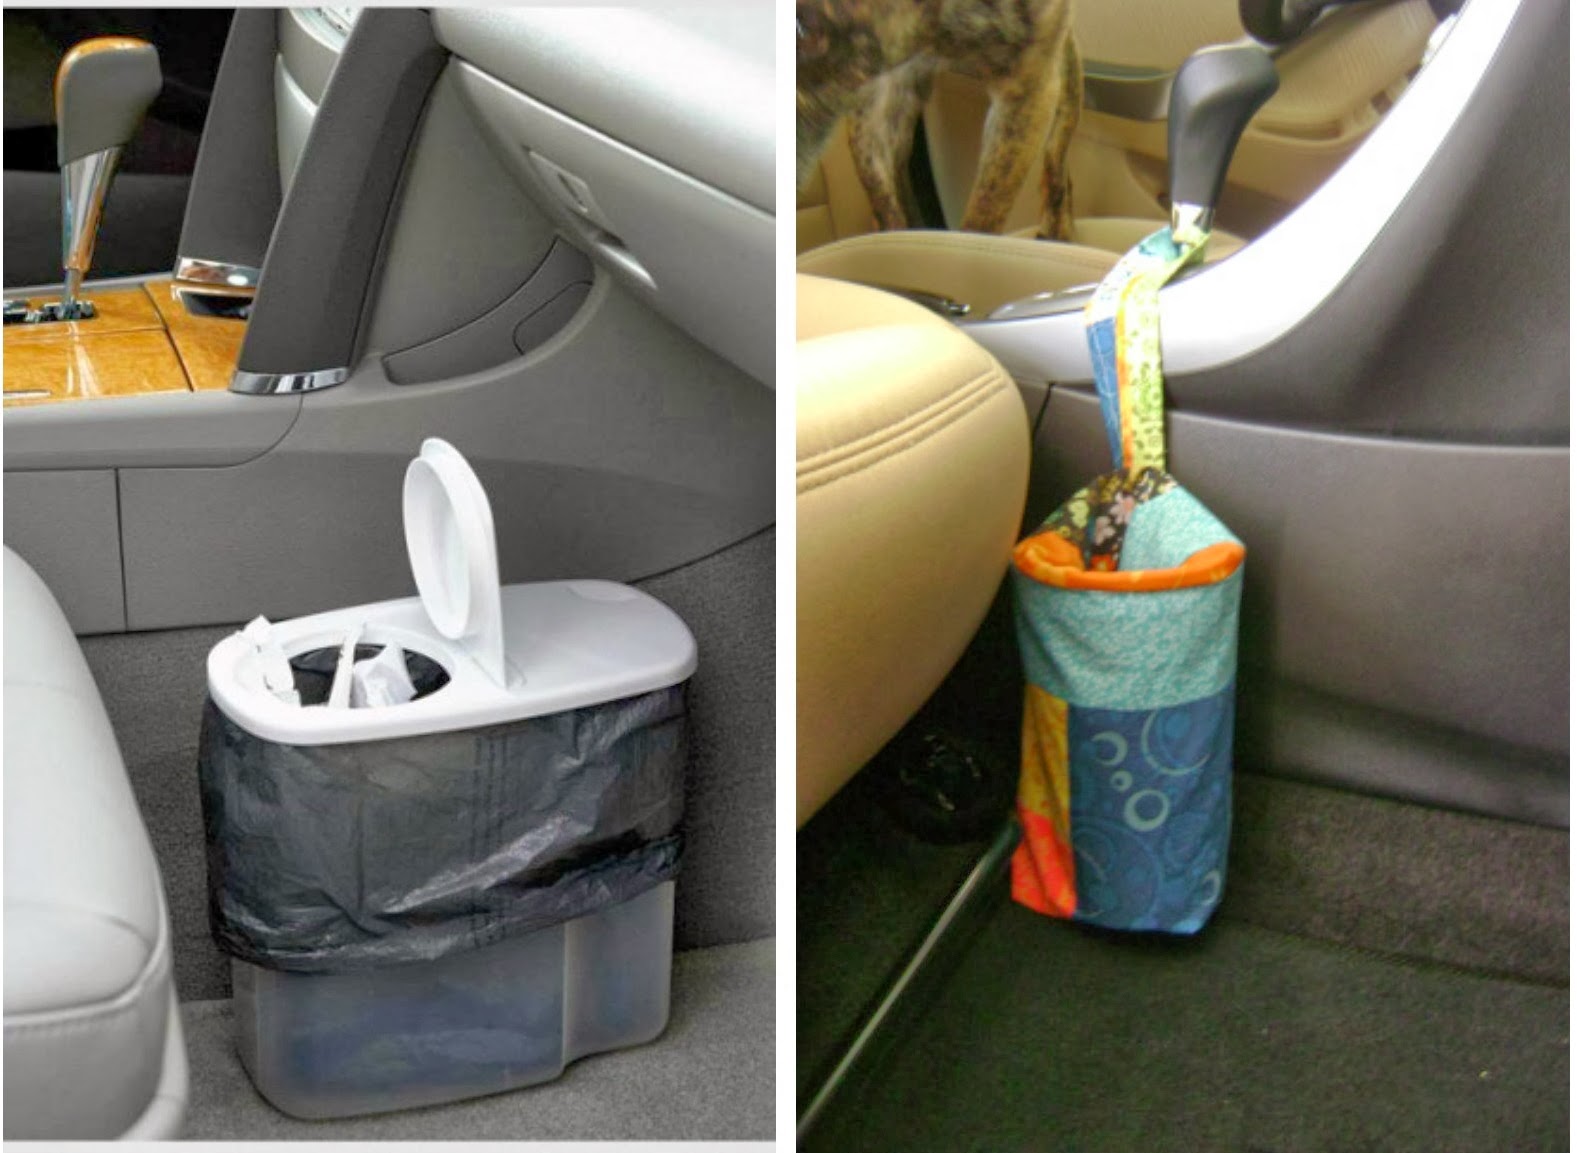 10. Cereal container make the best garbage can on your road trip